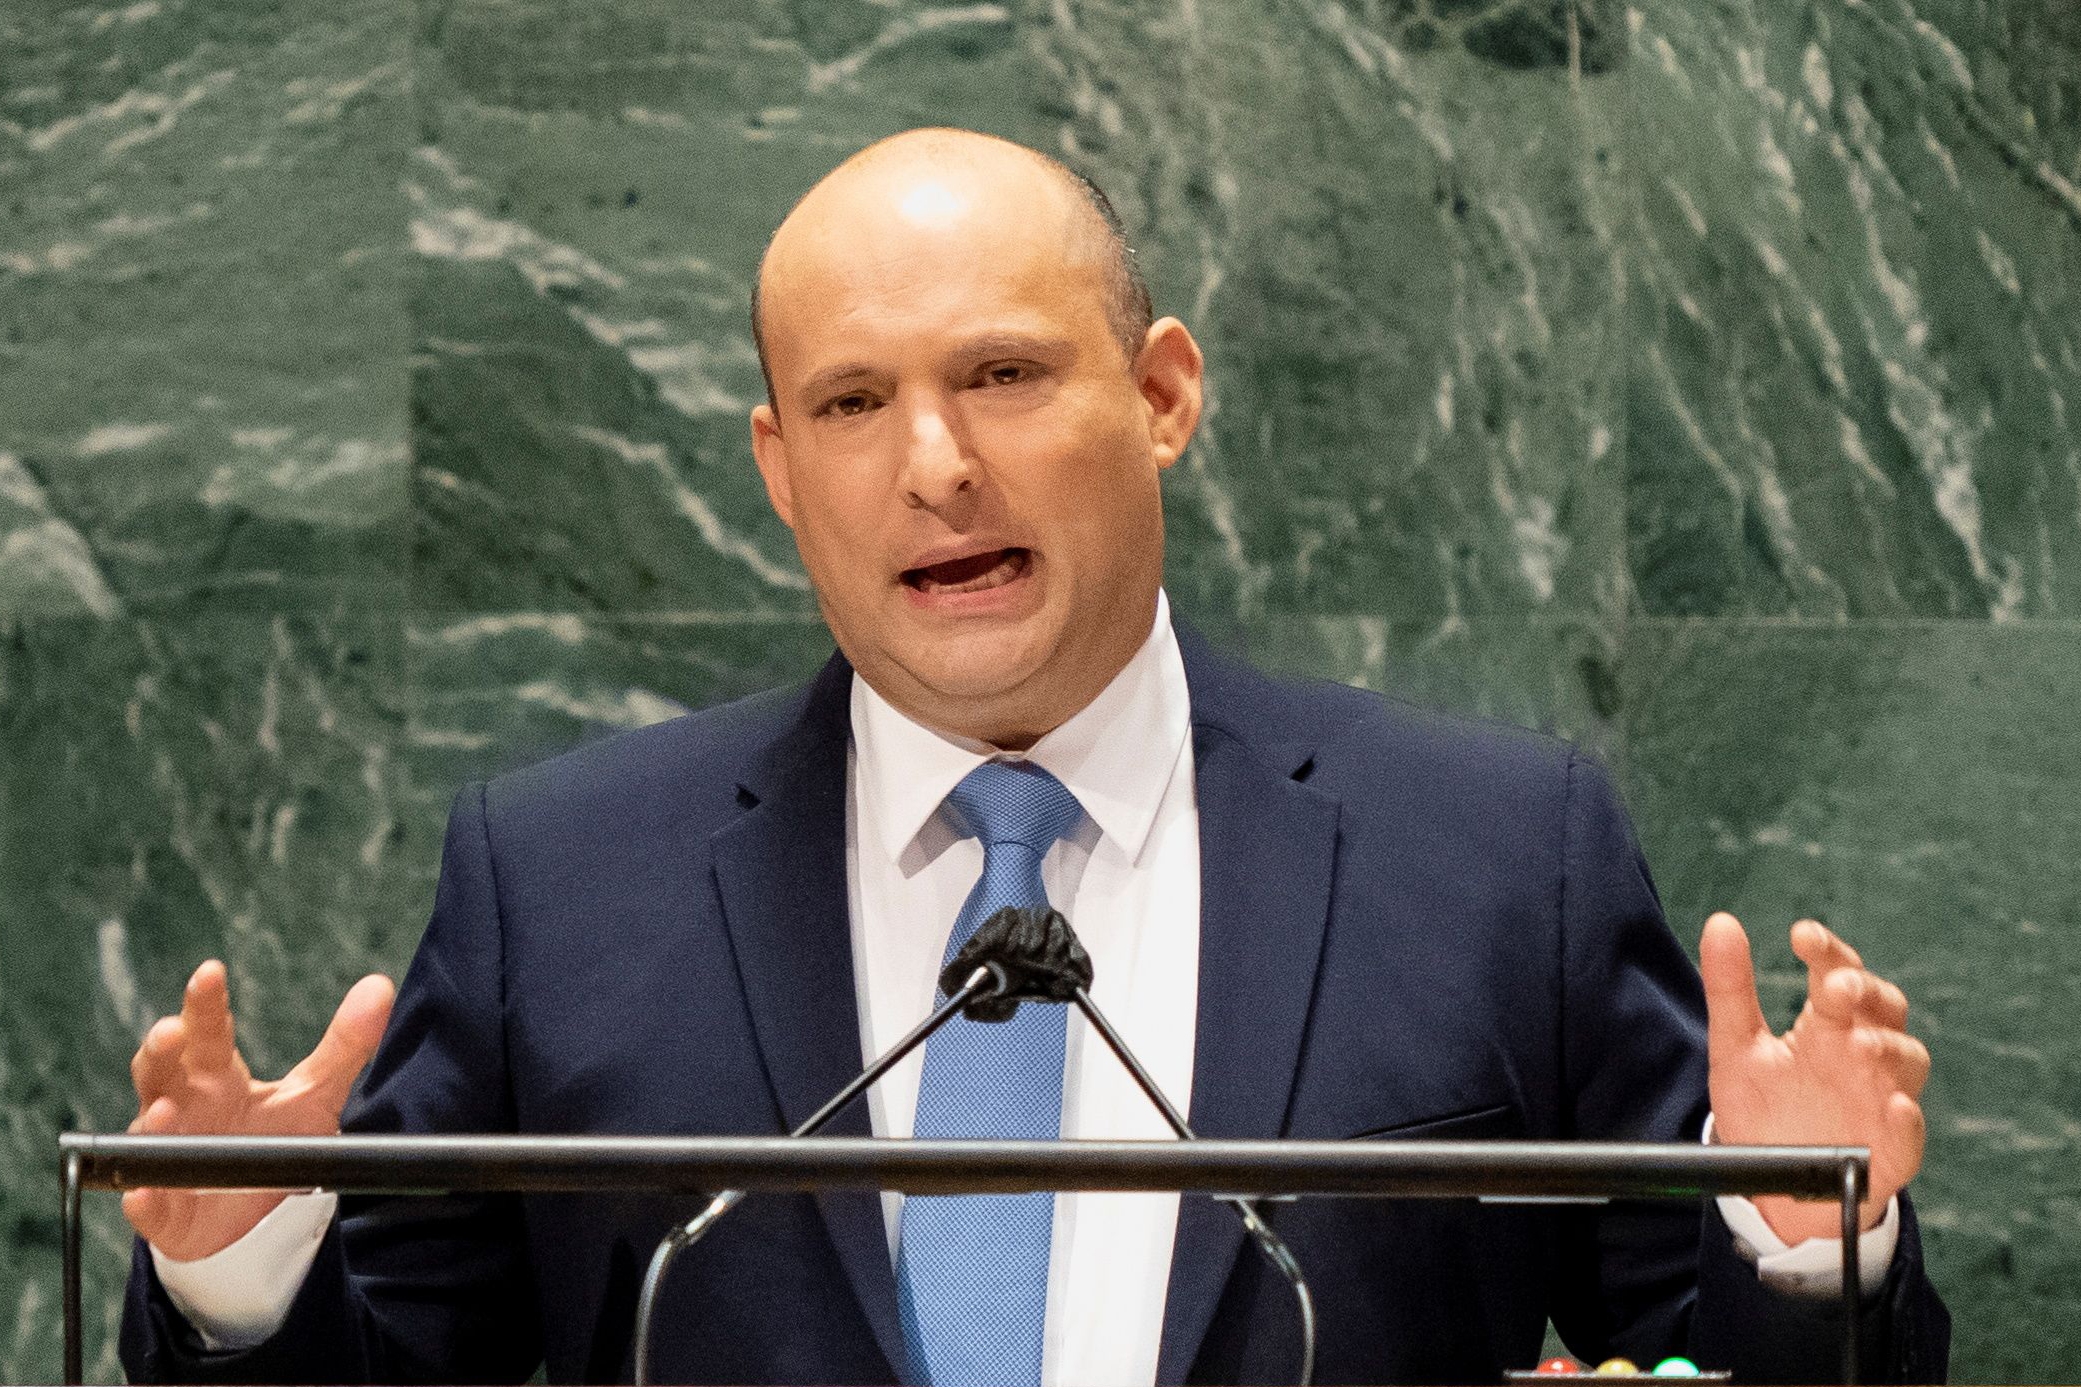 Israel’s prime minister Naftali Bennett addresses the 76th Session of the UN General Assembly, at the UN headquarters in New York, US, 27 September 2021 